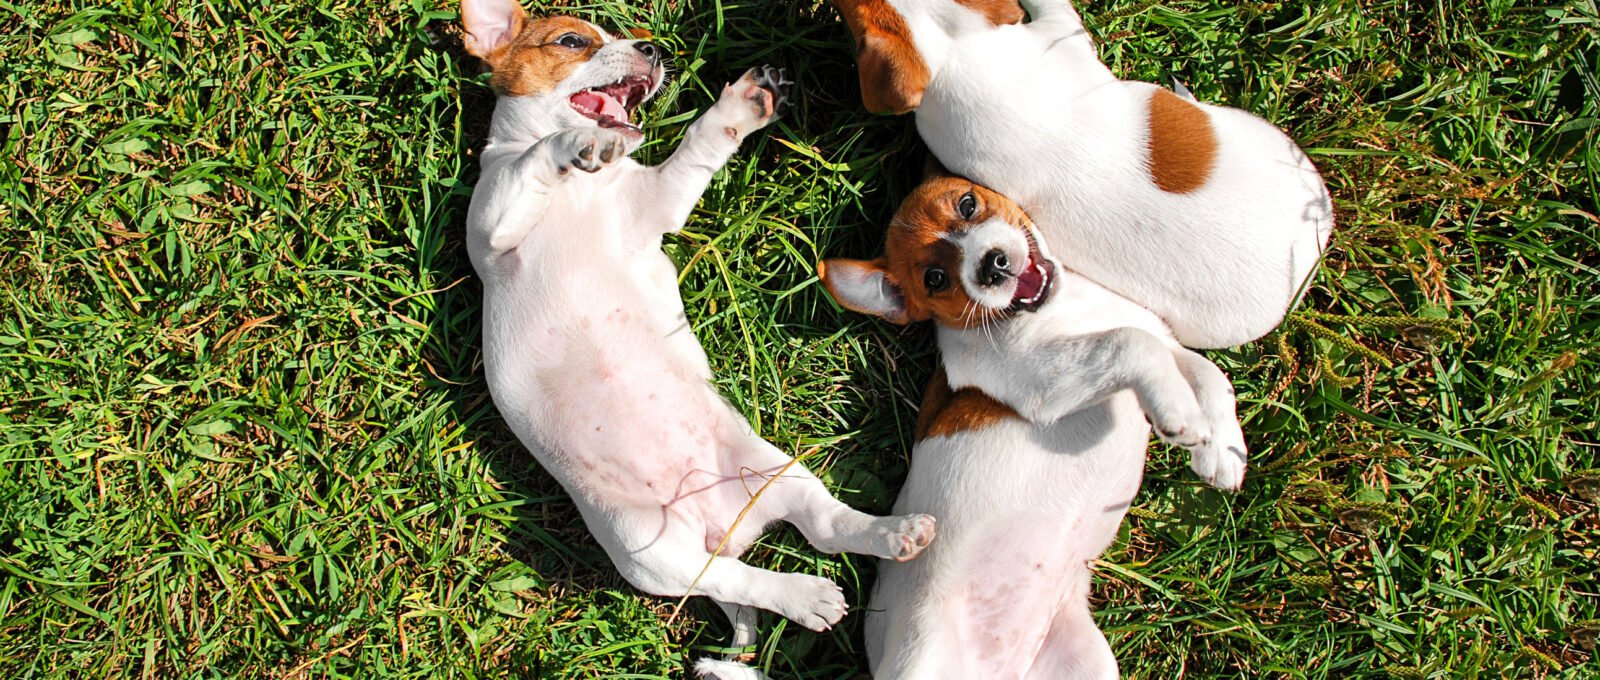 dogs lying on backs in grass - dog friendly places